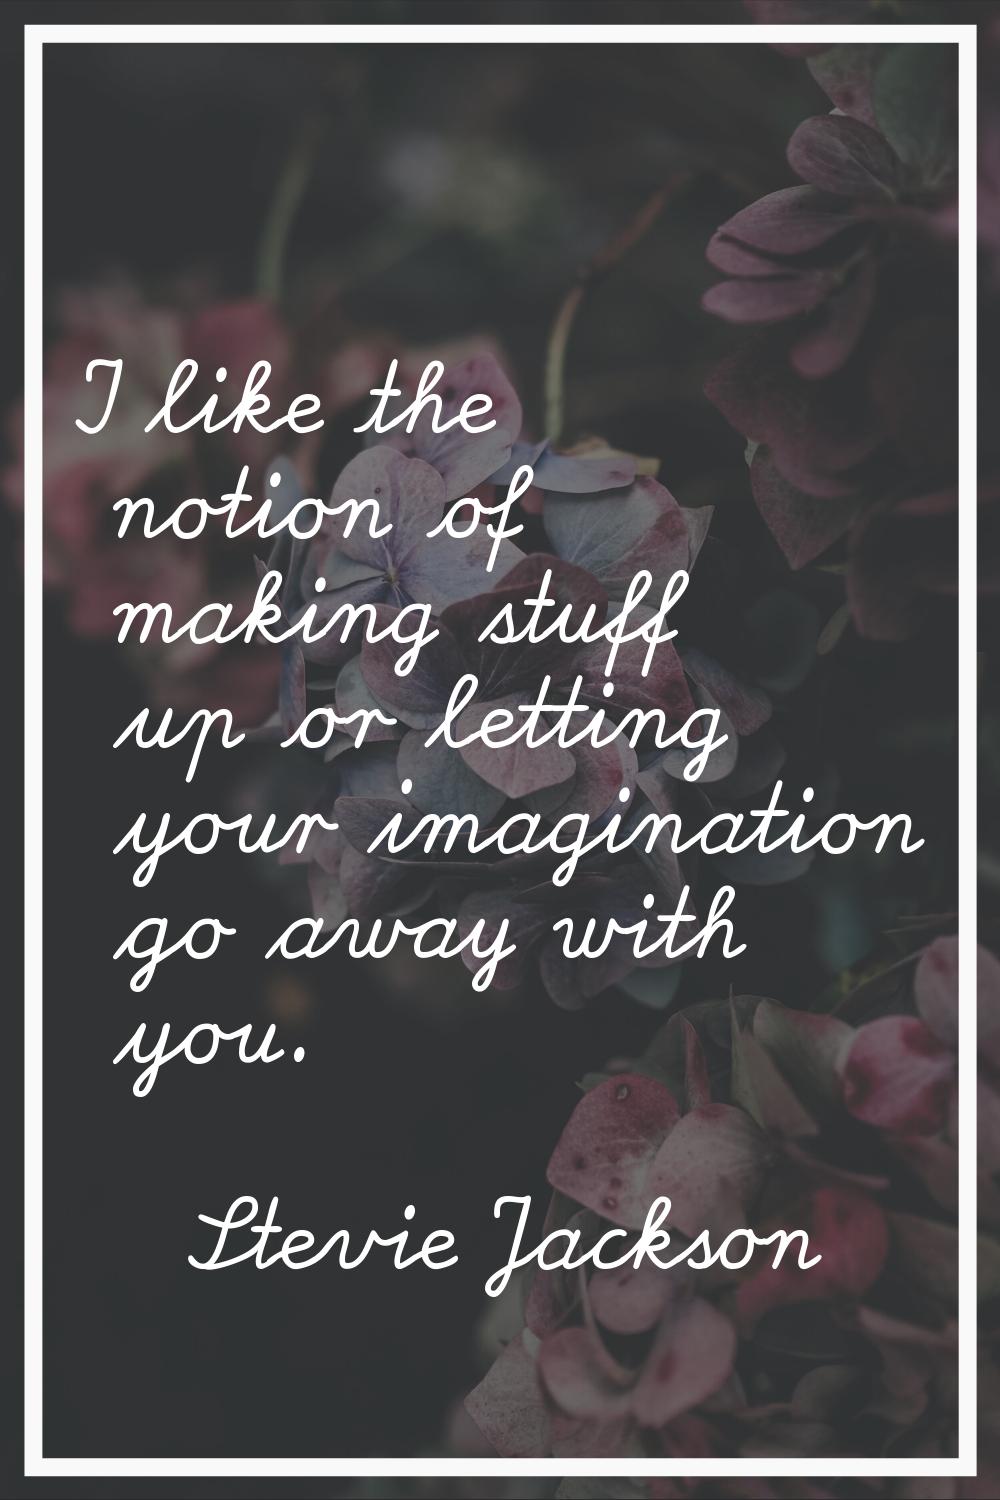 I like the notion of making stuff up or letting your imagination go away with you.